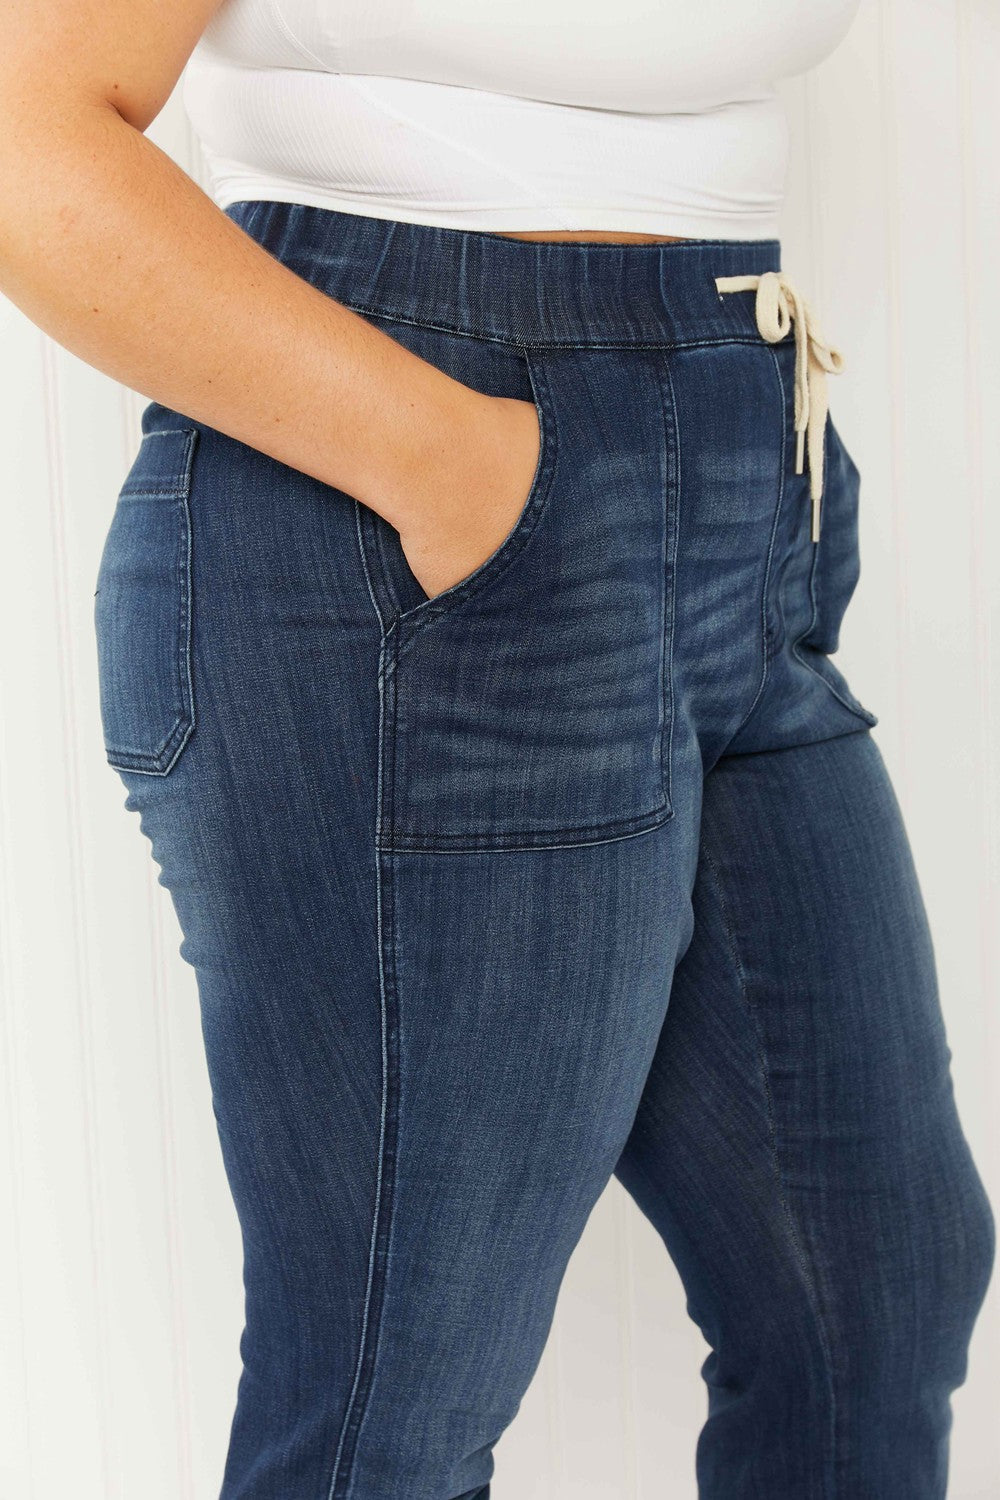 Judy Blue Full Size Drawstring Elastic Waist Jeans with Pockets Jeans JT's Designer Fashion